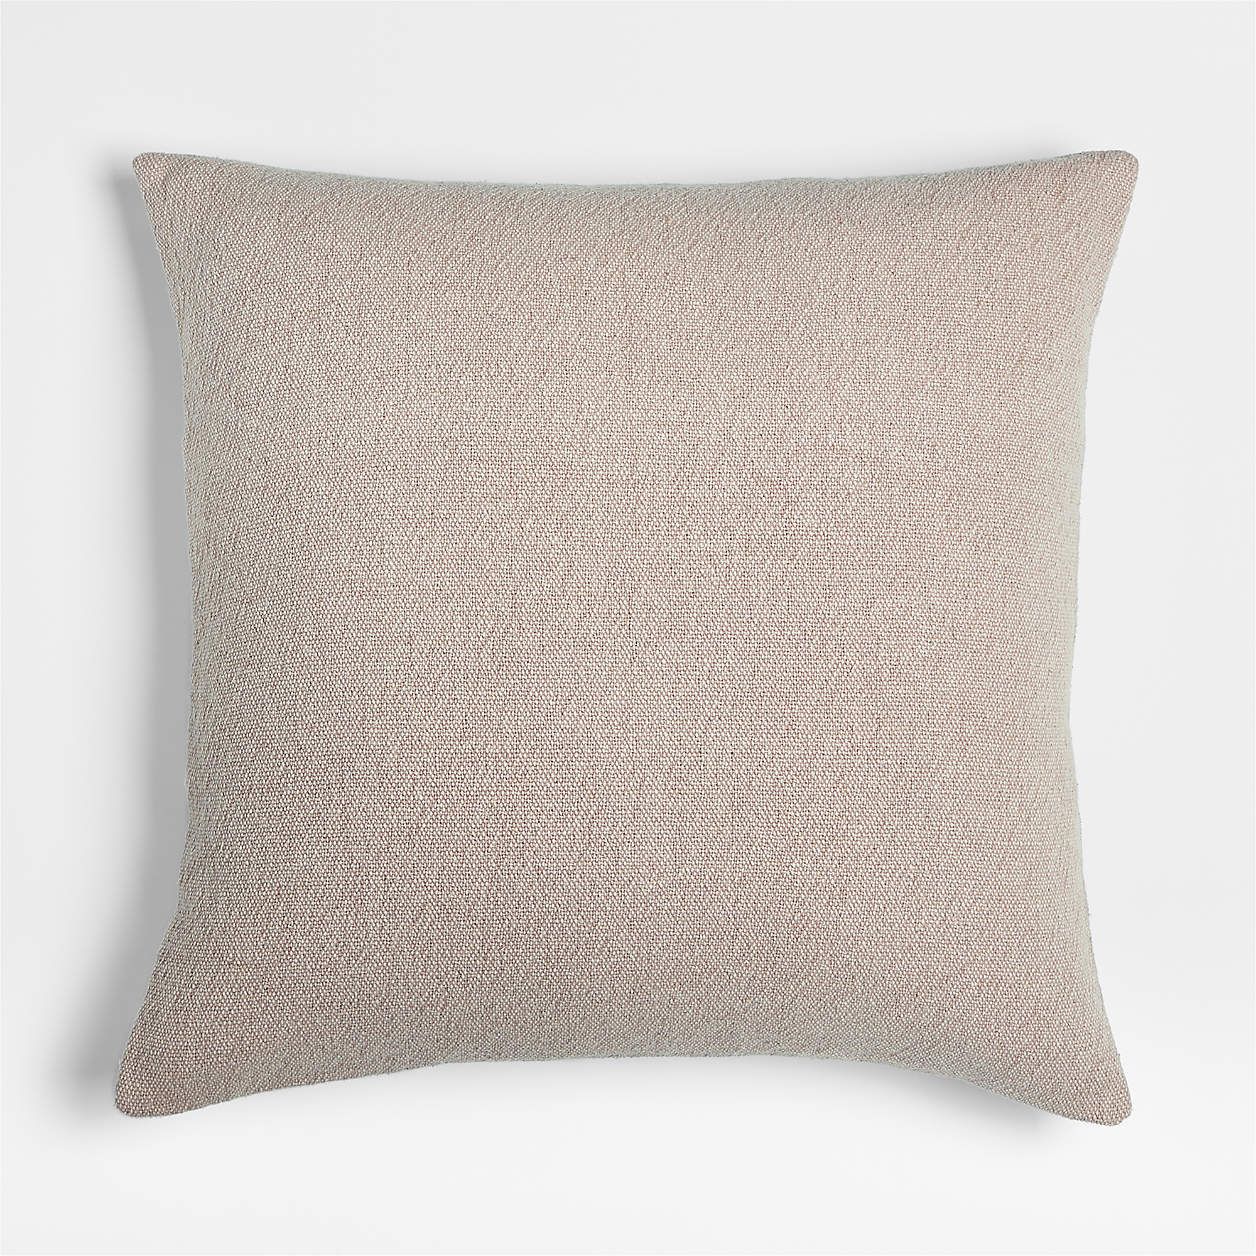 Earl Arnold Cotton 23"x23" Frothy Beige Throw Pillow Cover by Jake Arnold + Reviews | Crate & Bar... | Crate & Barrel